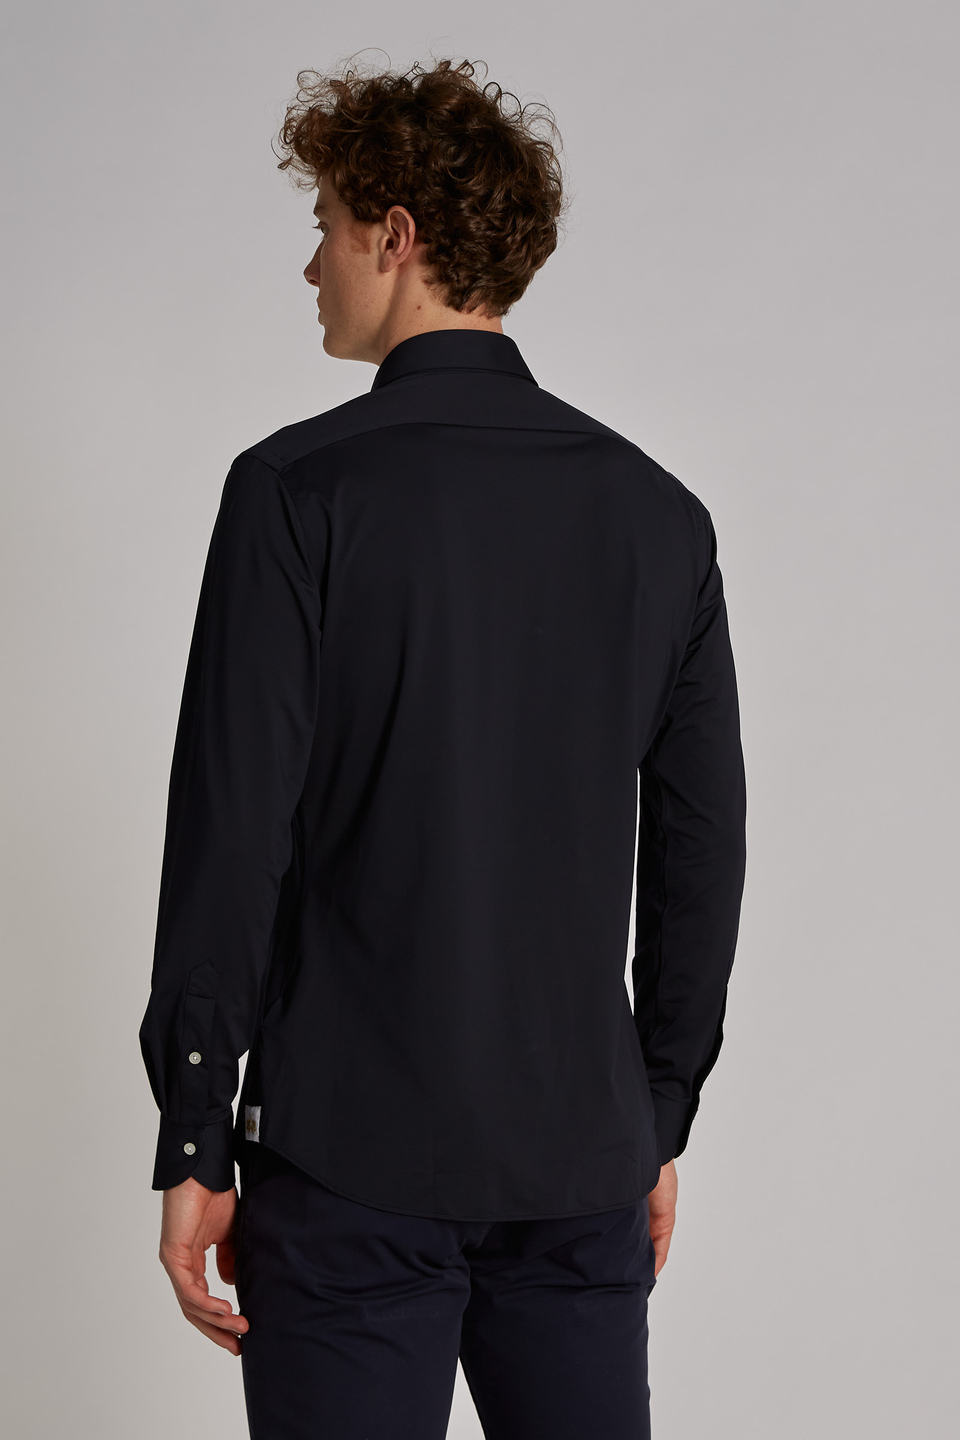 Men's long-sleeved synthetic fabric shirt - La Martina - Official Online Shop